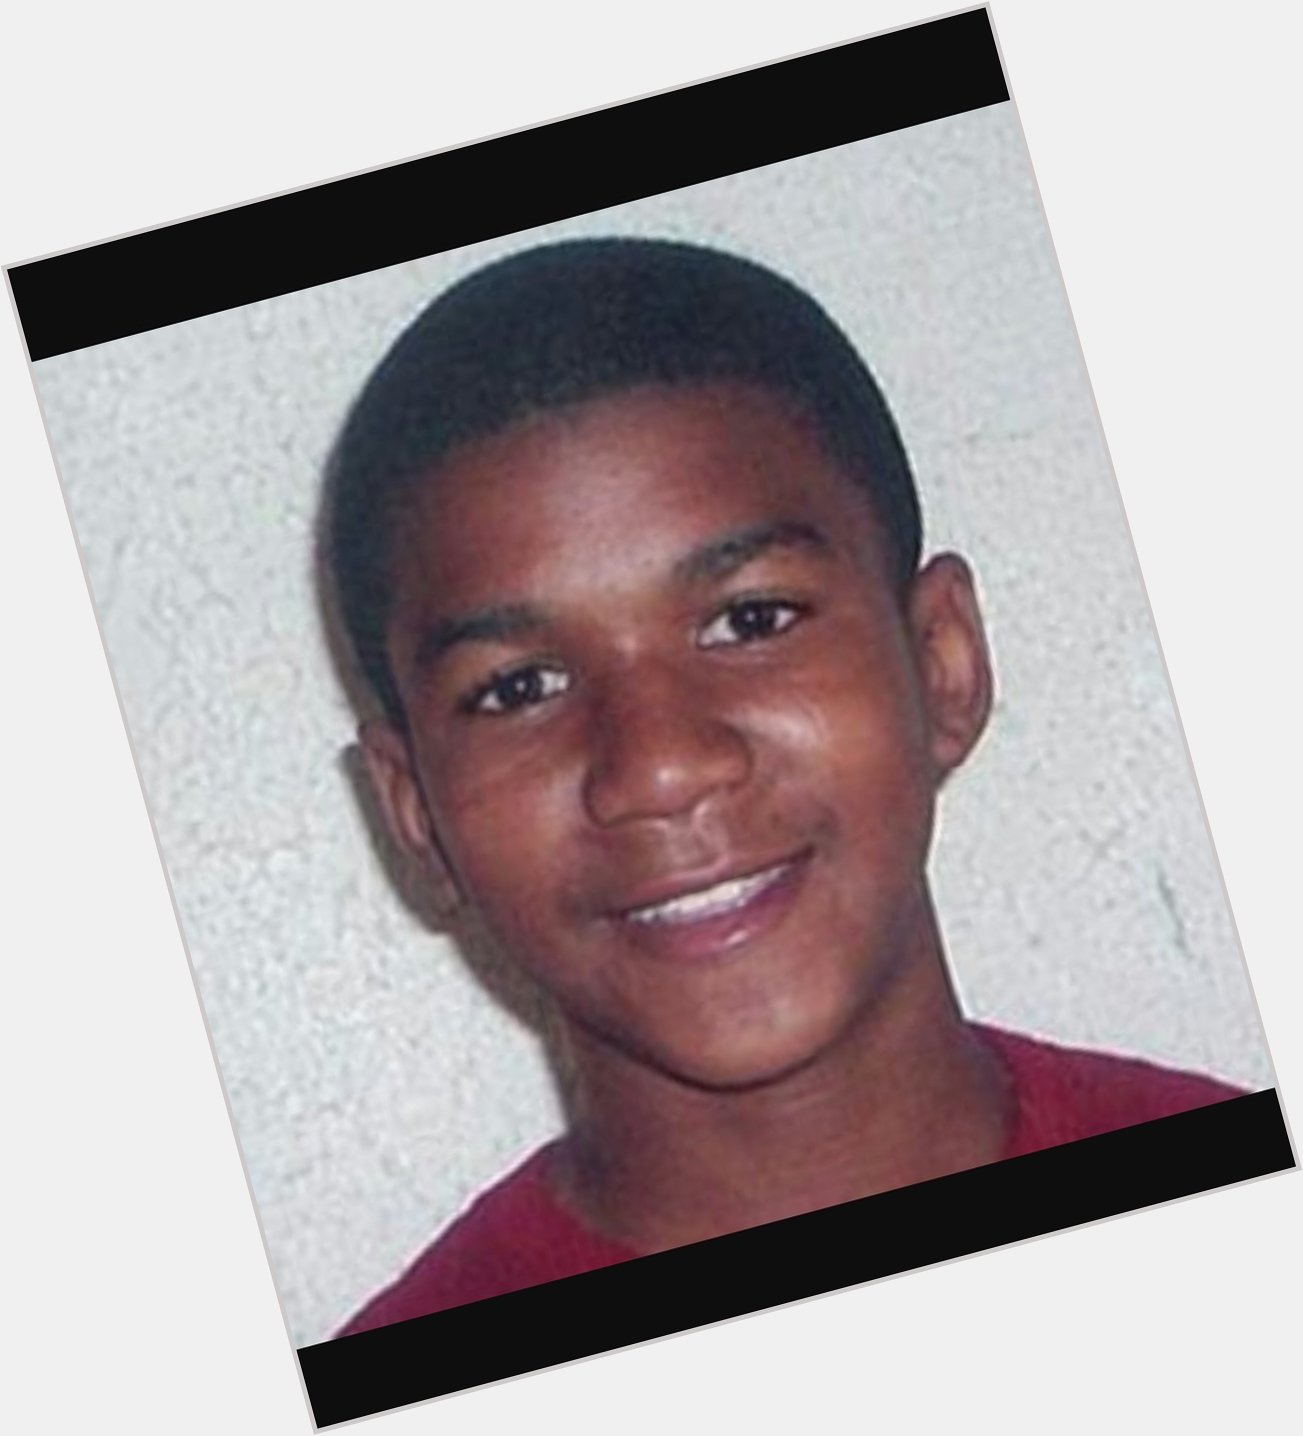 Happy birthday Trayvon Martin Rest in paradise he would of been 22  